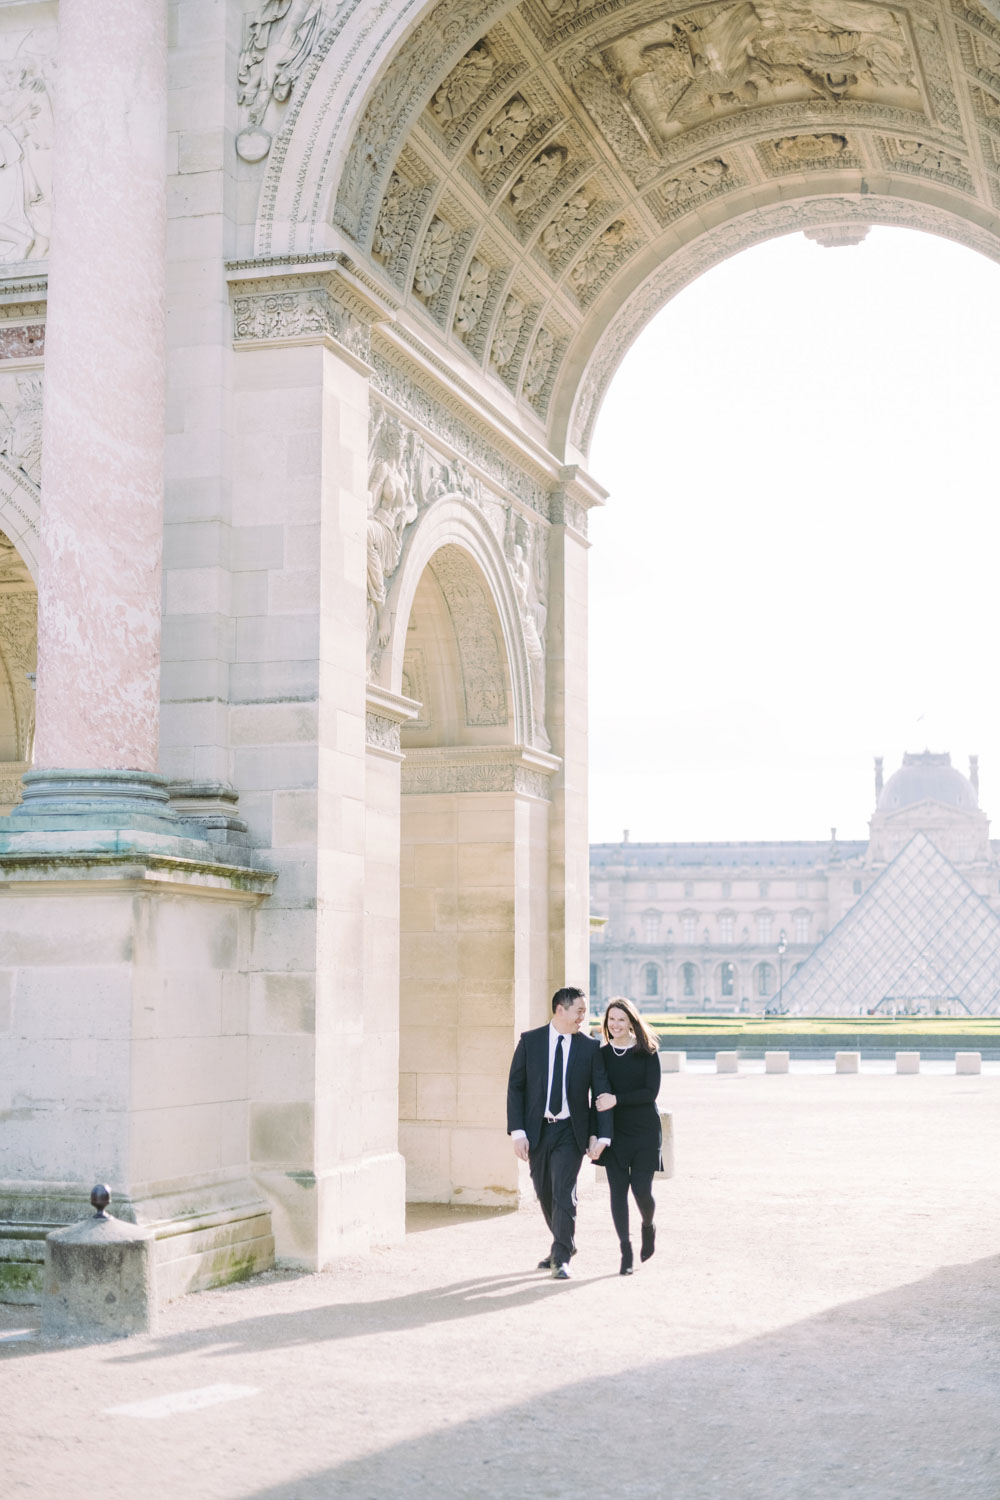  lovers are walking at the louvre museum in paris.